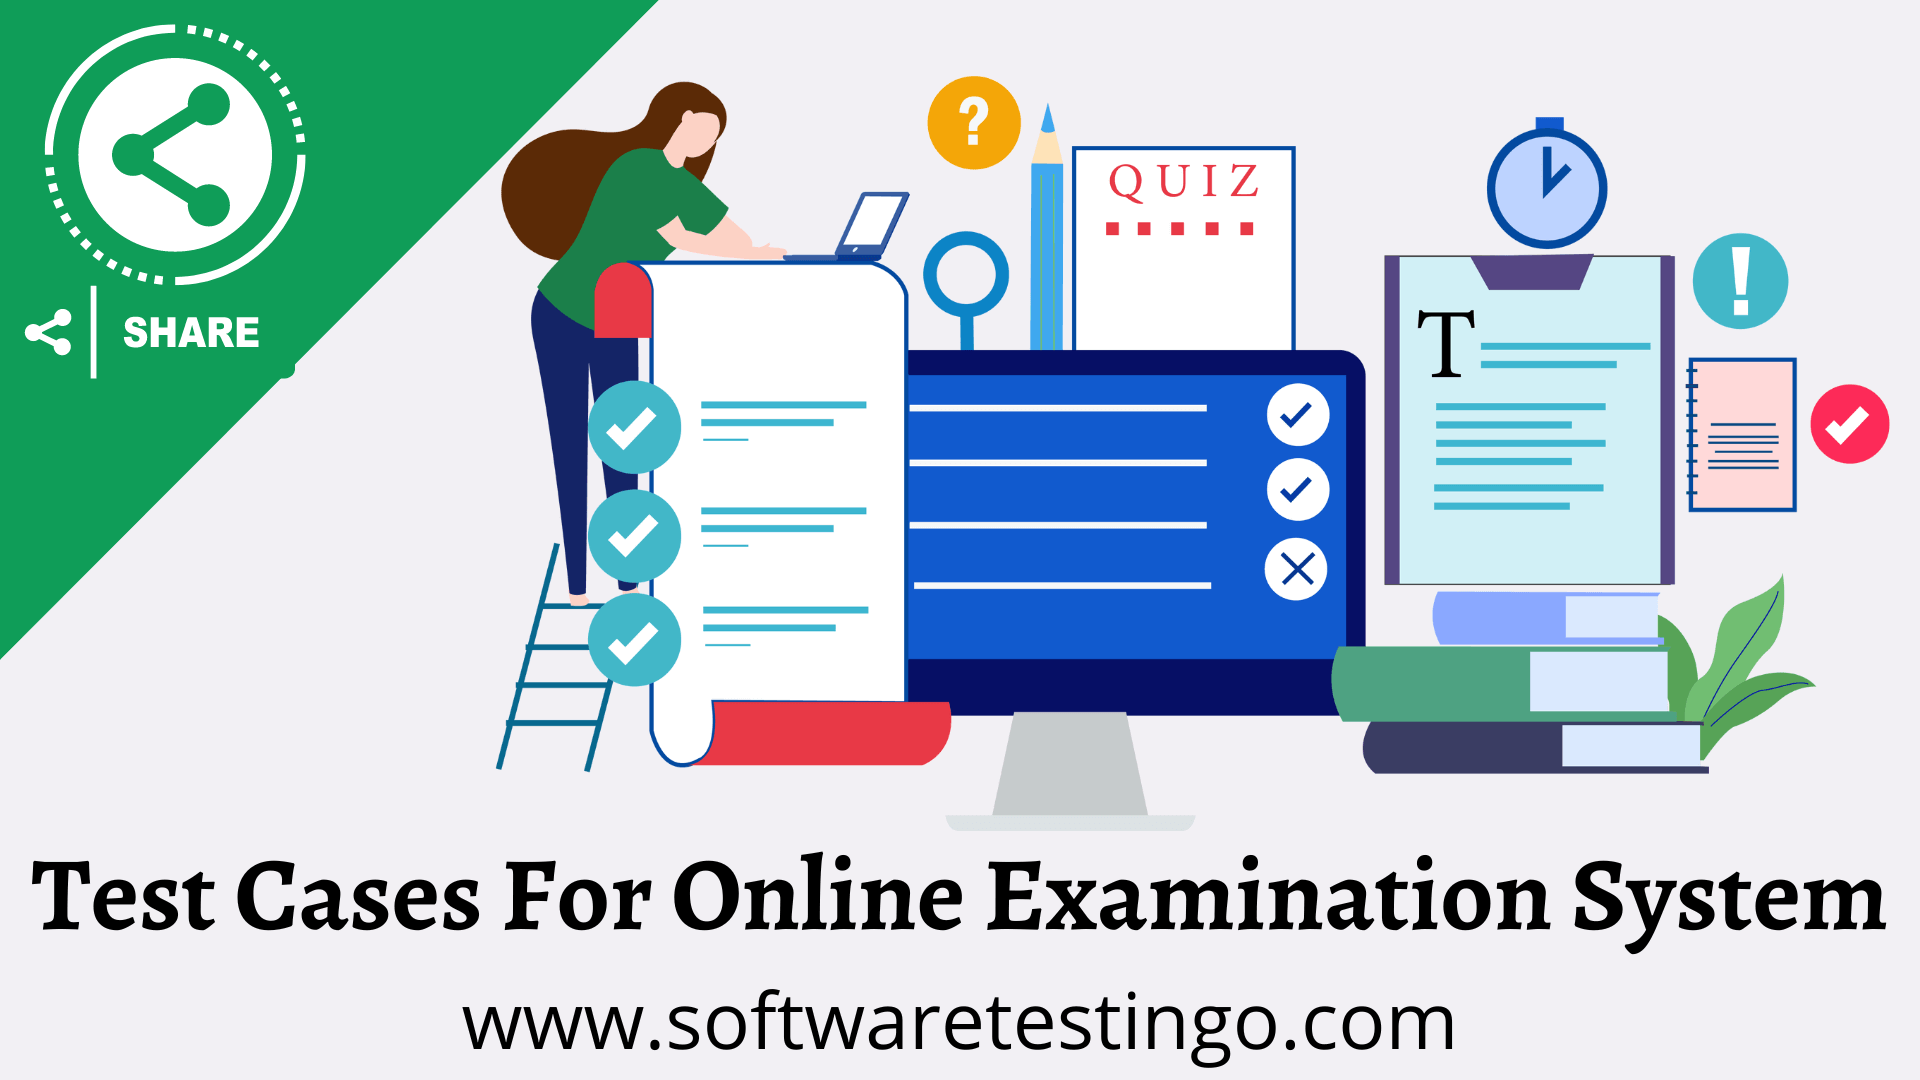 Test Cases For Online Examination System